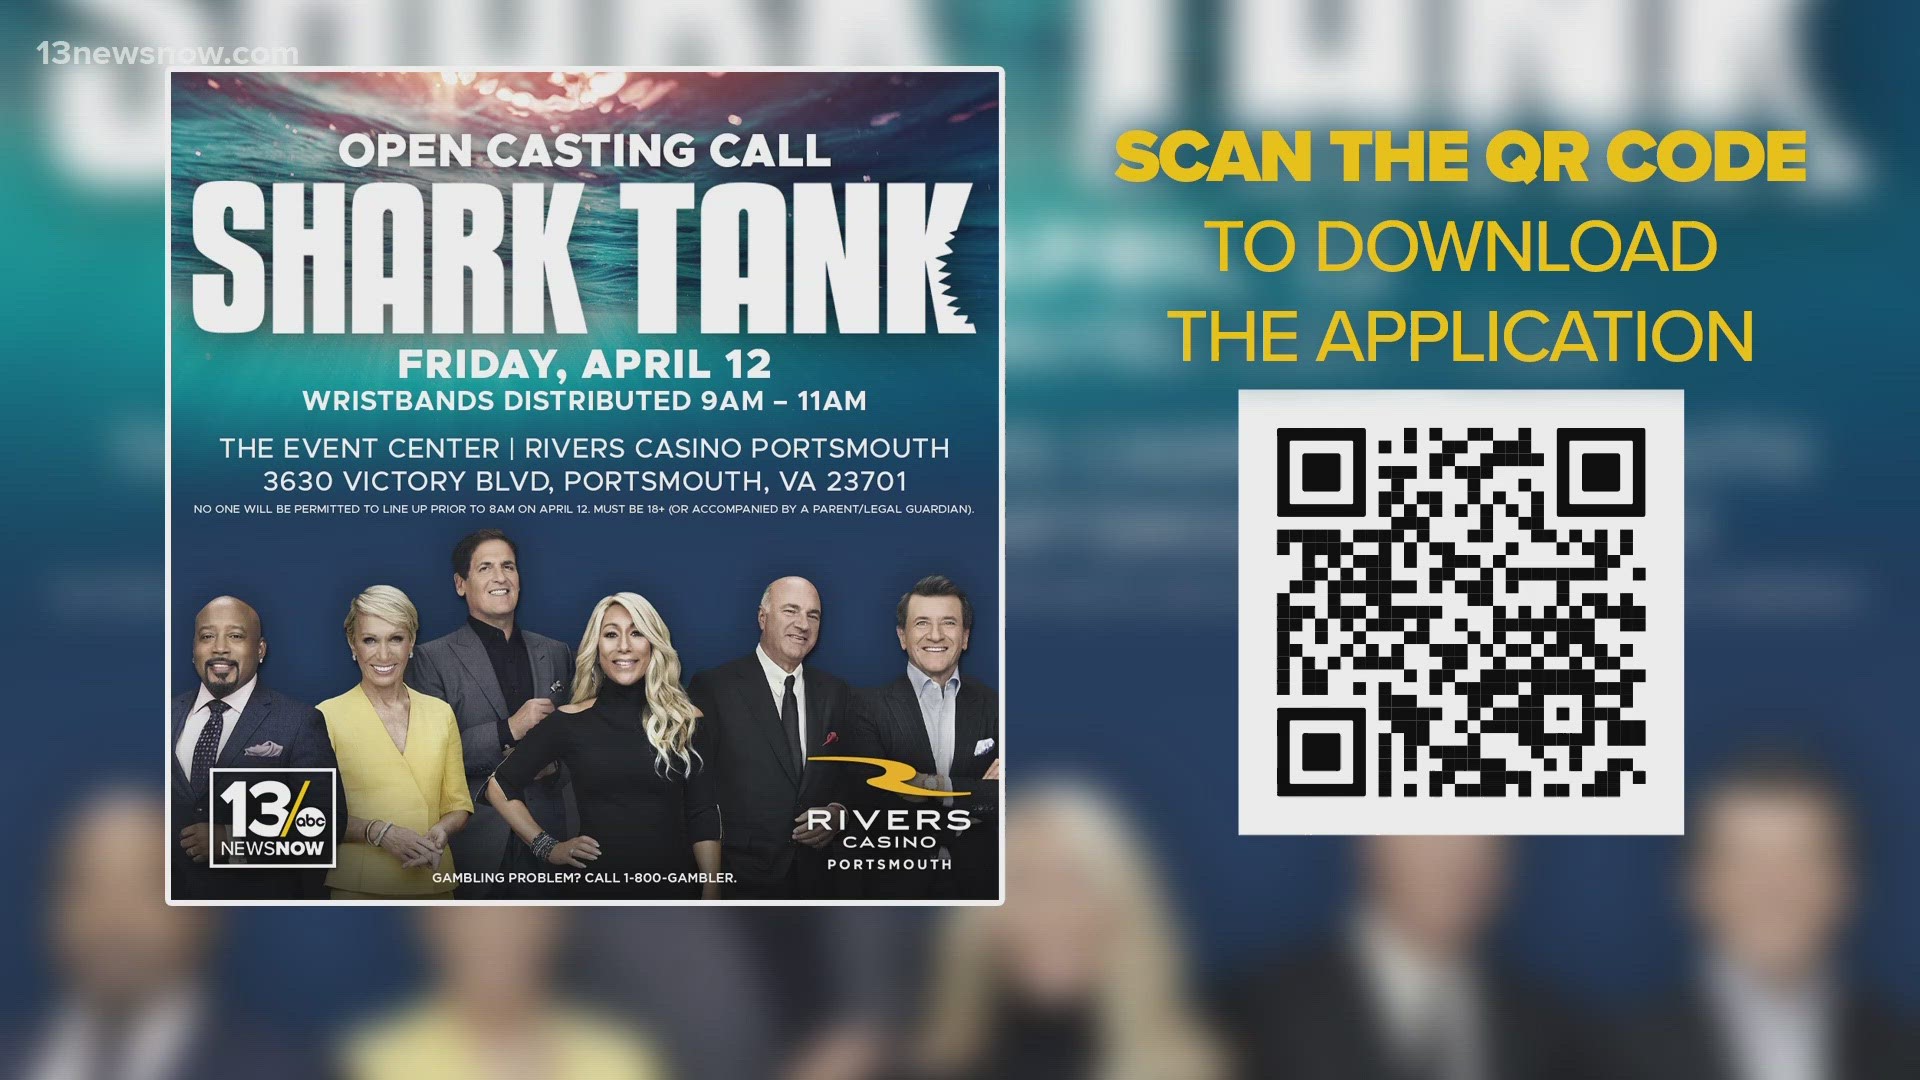 The Shark Tank casting team is coming to Rivers Casino Portsmouth. Mindy Zemrak, the supervising casting producer for the show tells viewers what they can expect.